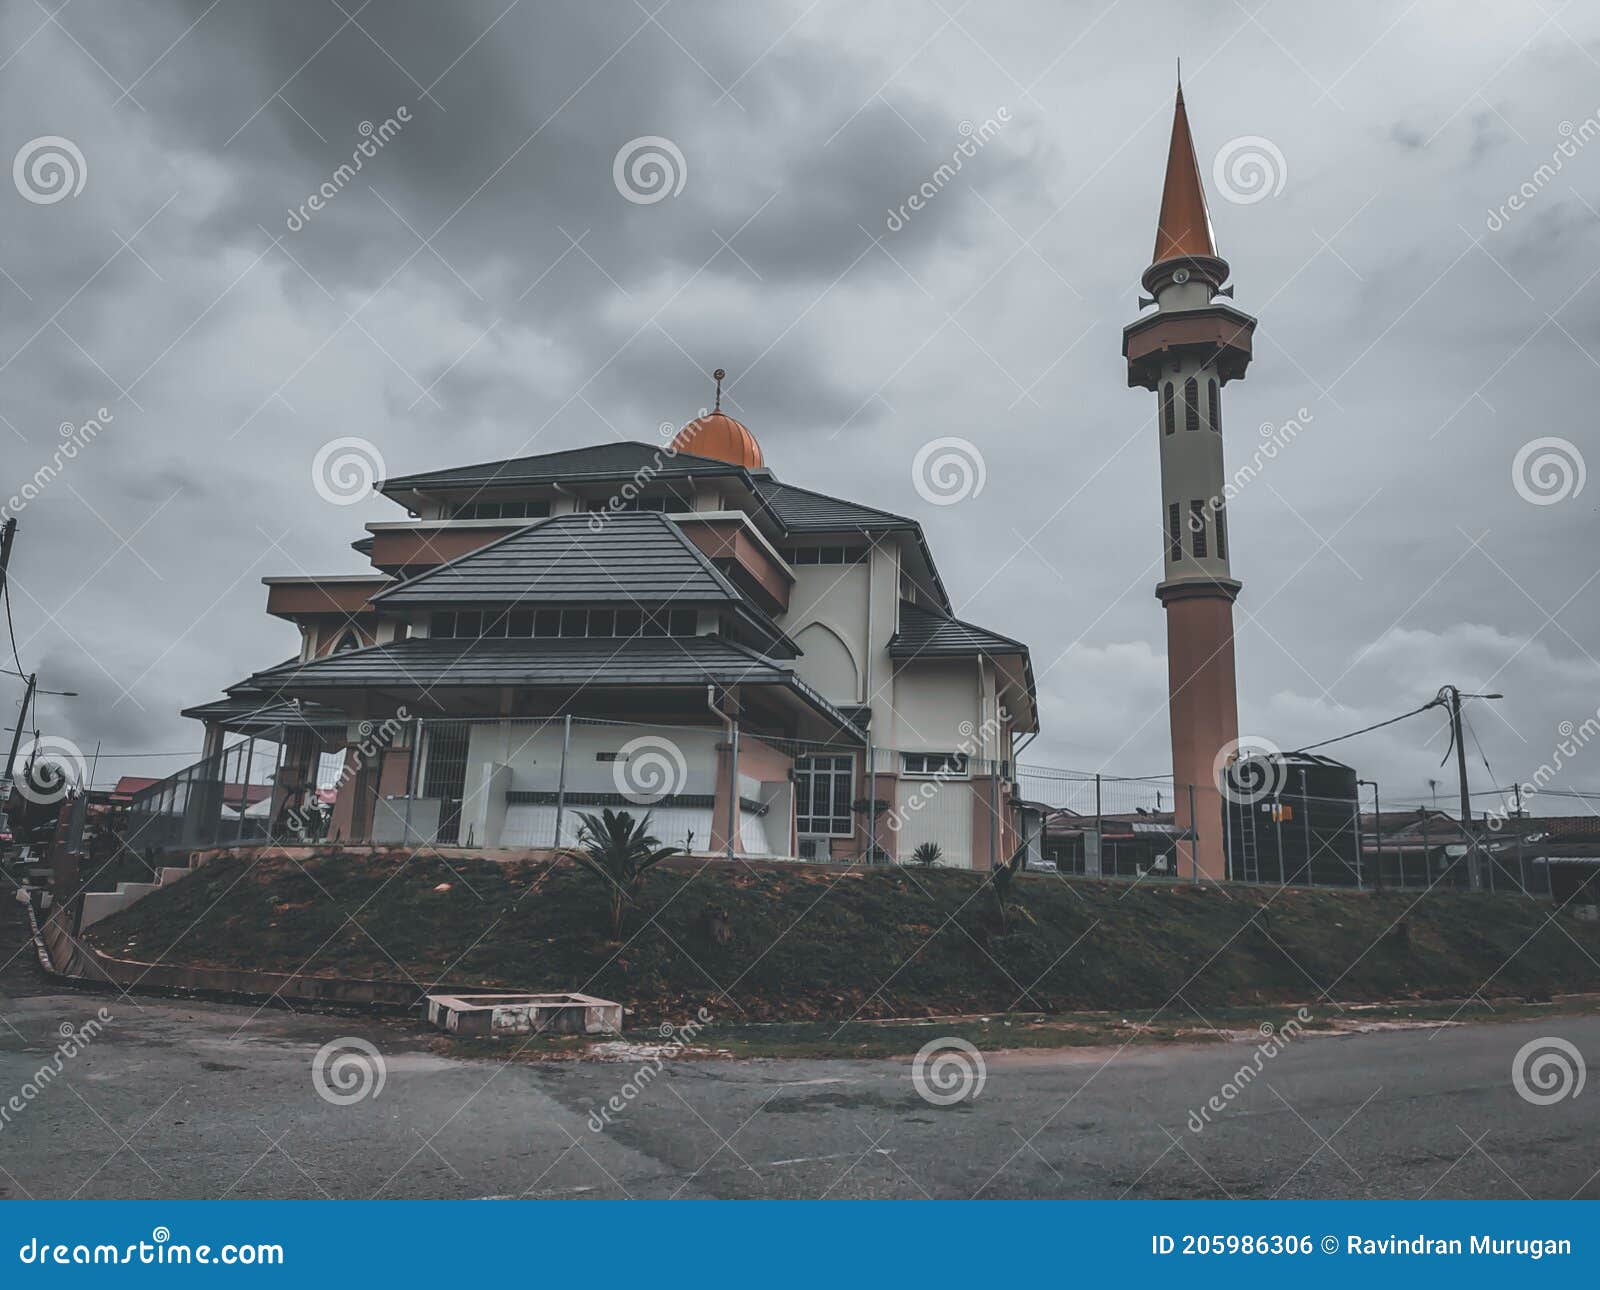 landscape view of mosque with dark mode preset